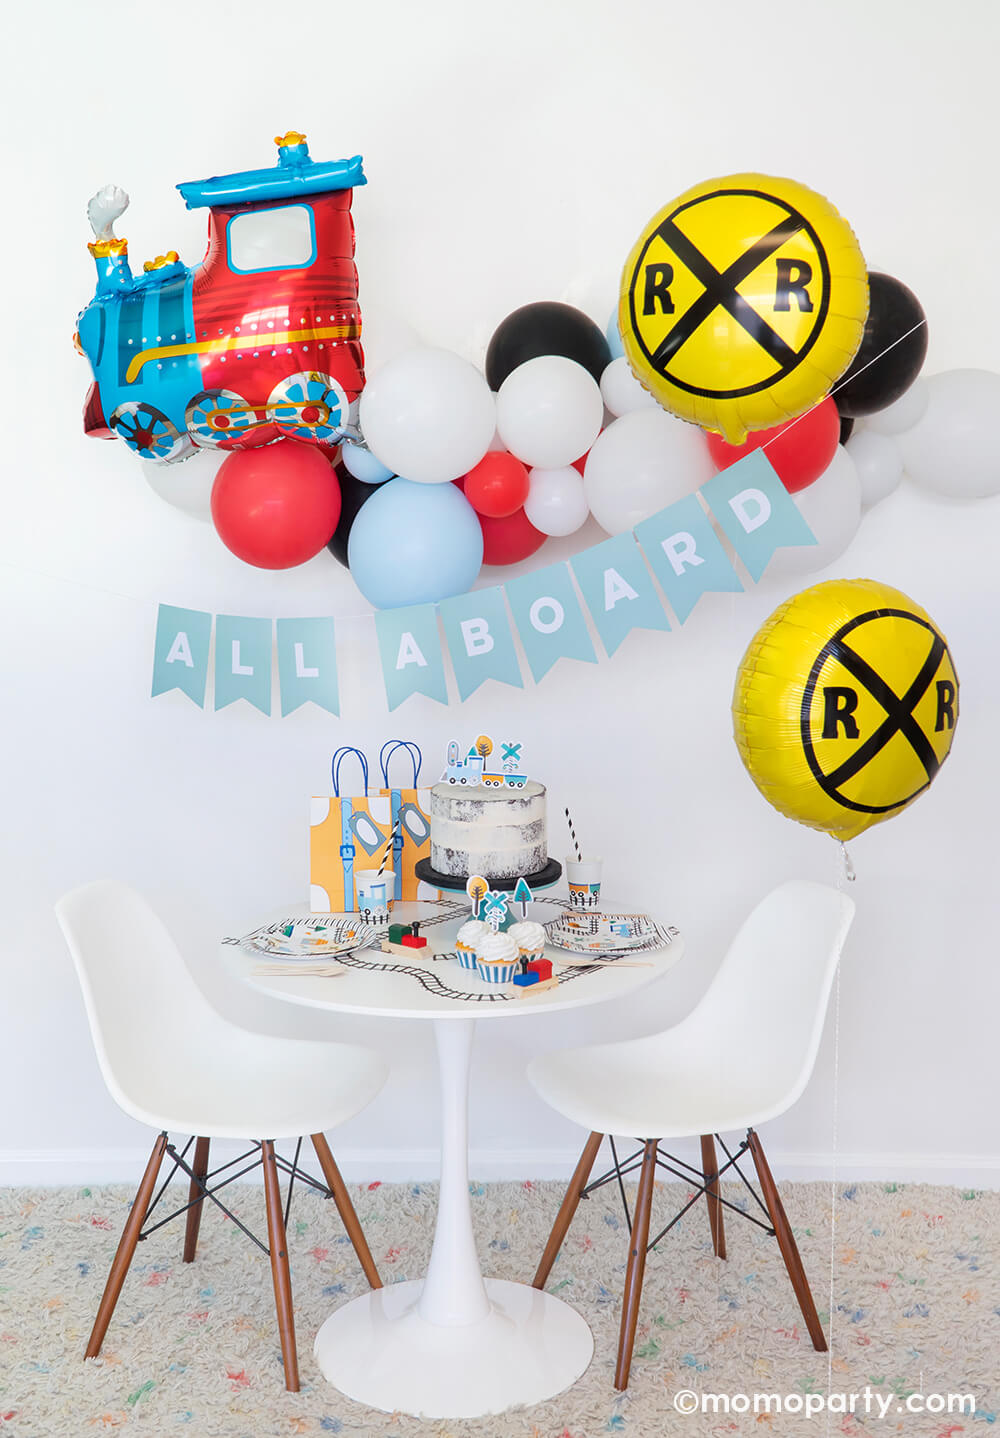 Momo Party Train themed party set up with a choo-choo-train-foil-balloon with classic train balloon garland hanging on the wall, RAILROAD CROSSING SIGN FOIL BALLOONs on the side, a light blue letter board spelled in "all aboard", a white rounded table filled with STEAM TRAIN SMALL PLATES, STEAM TRAIN CUPS, STEAM TRAIN CUPCAKE TOPPERS on the cake and cupcakes, train tape decorated the table top. Such a cute set up for a train themed birthday party, thomas the train birthday party, boy's birthday party